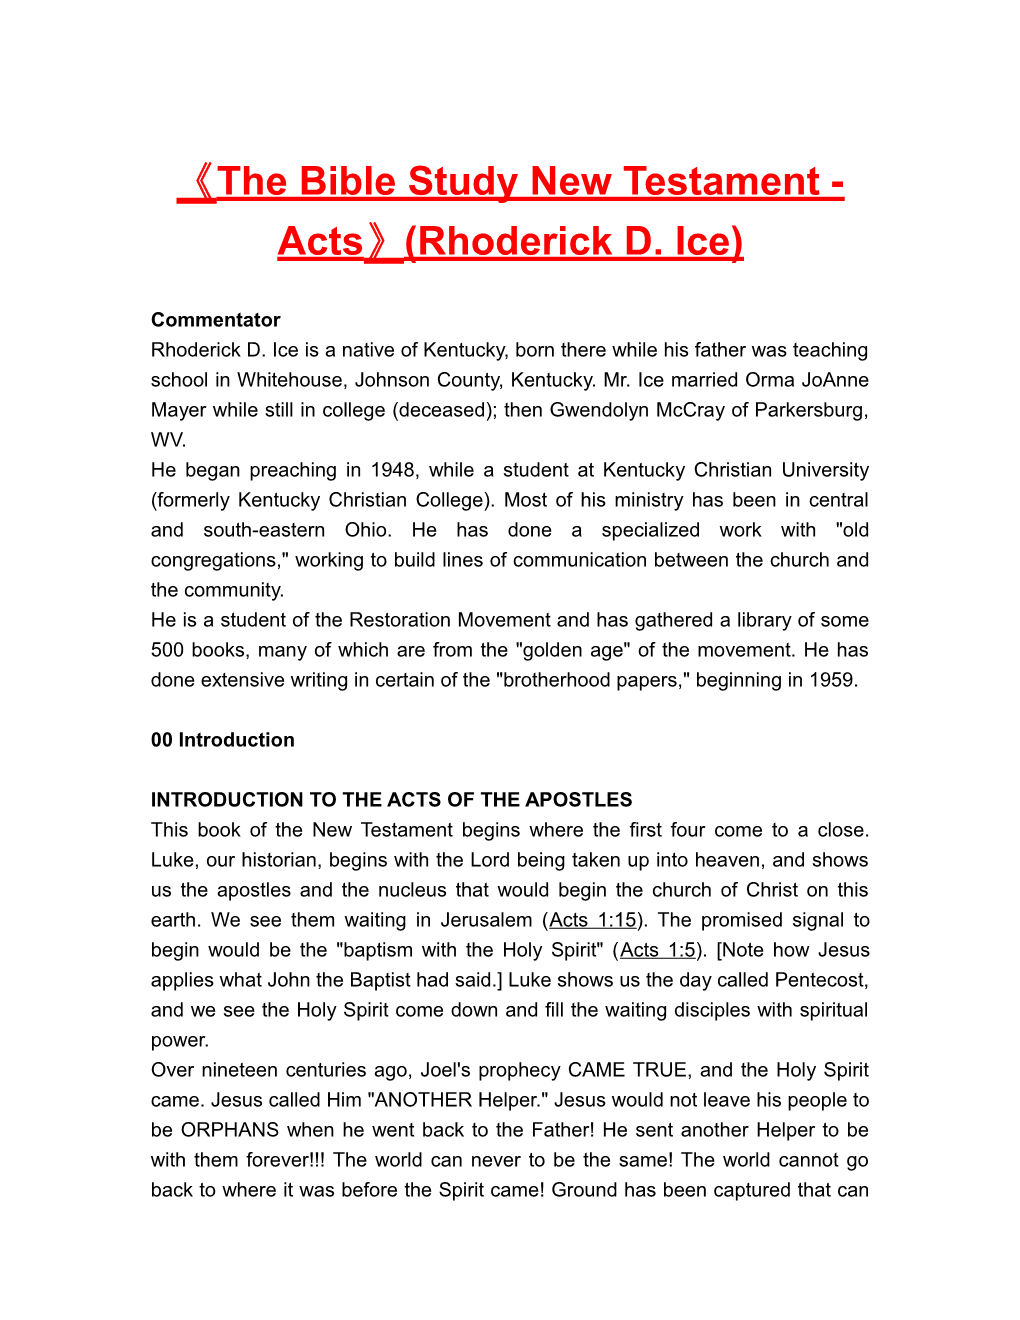 The Bible Study New Testament - Acts (Rhoderick D. Ice)